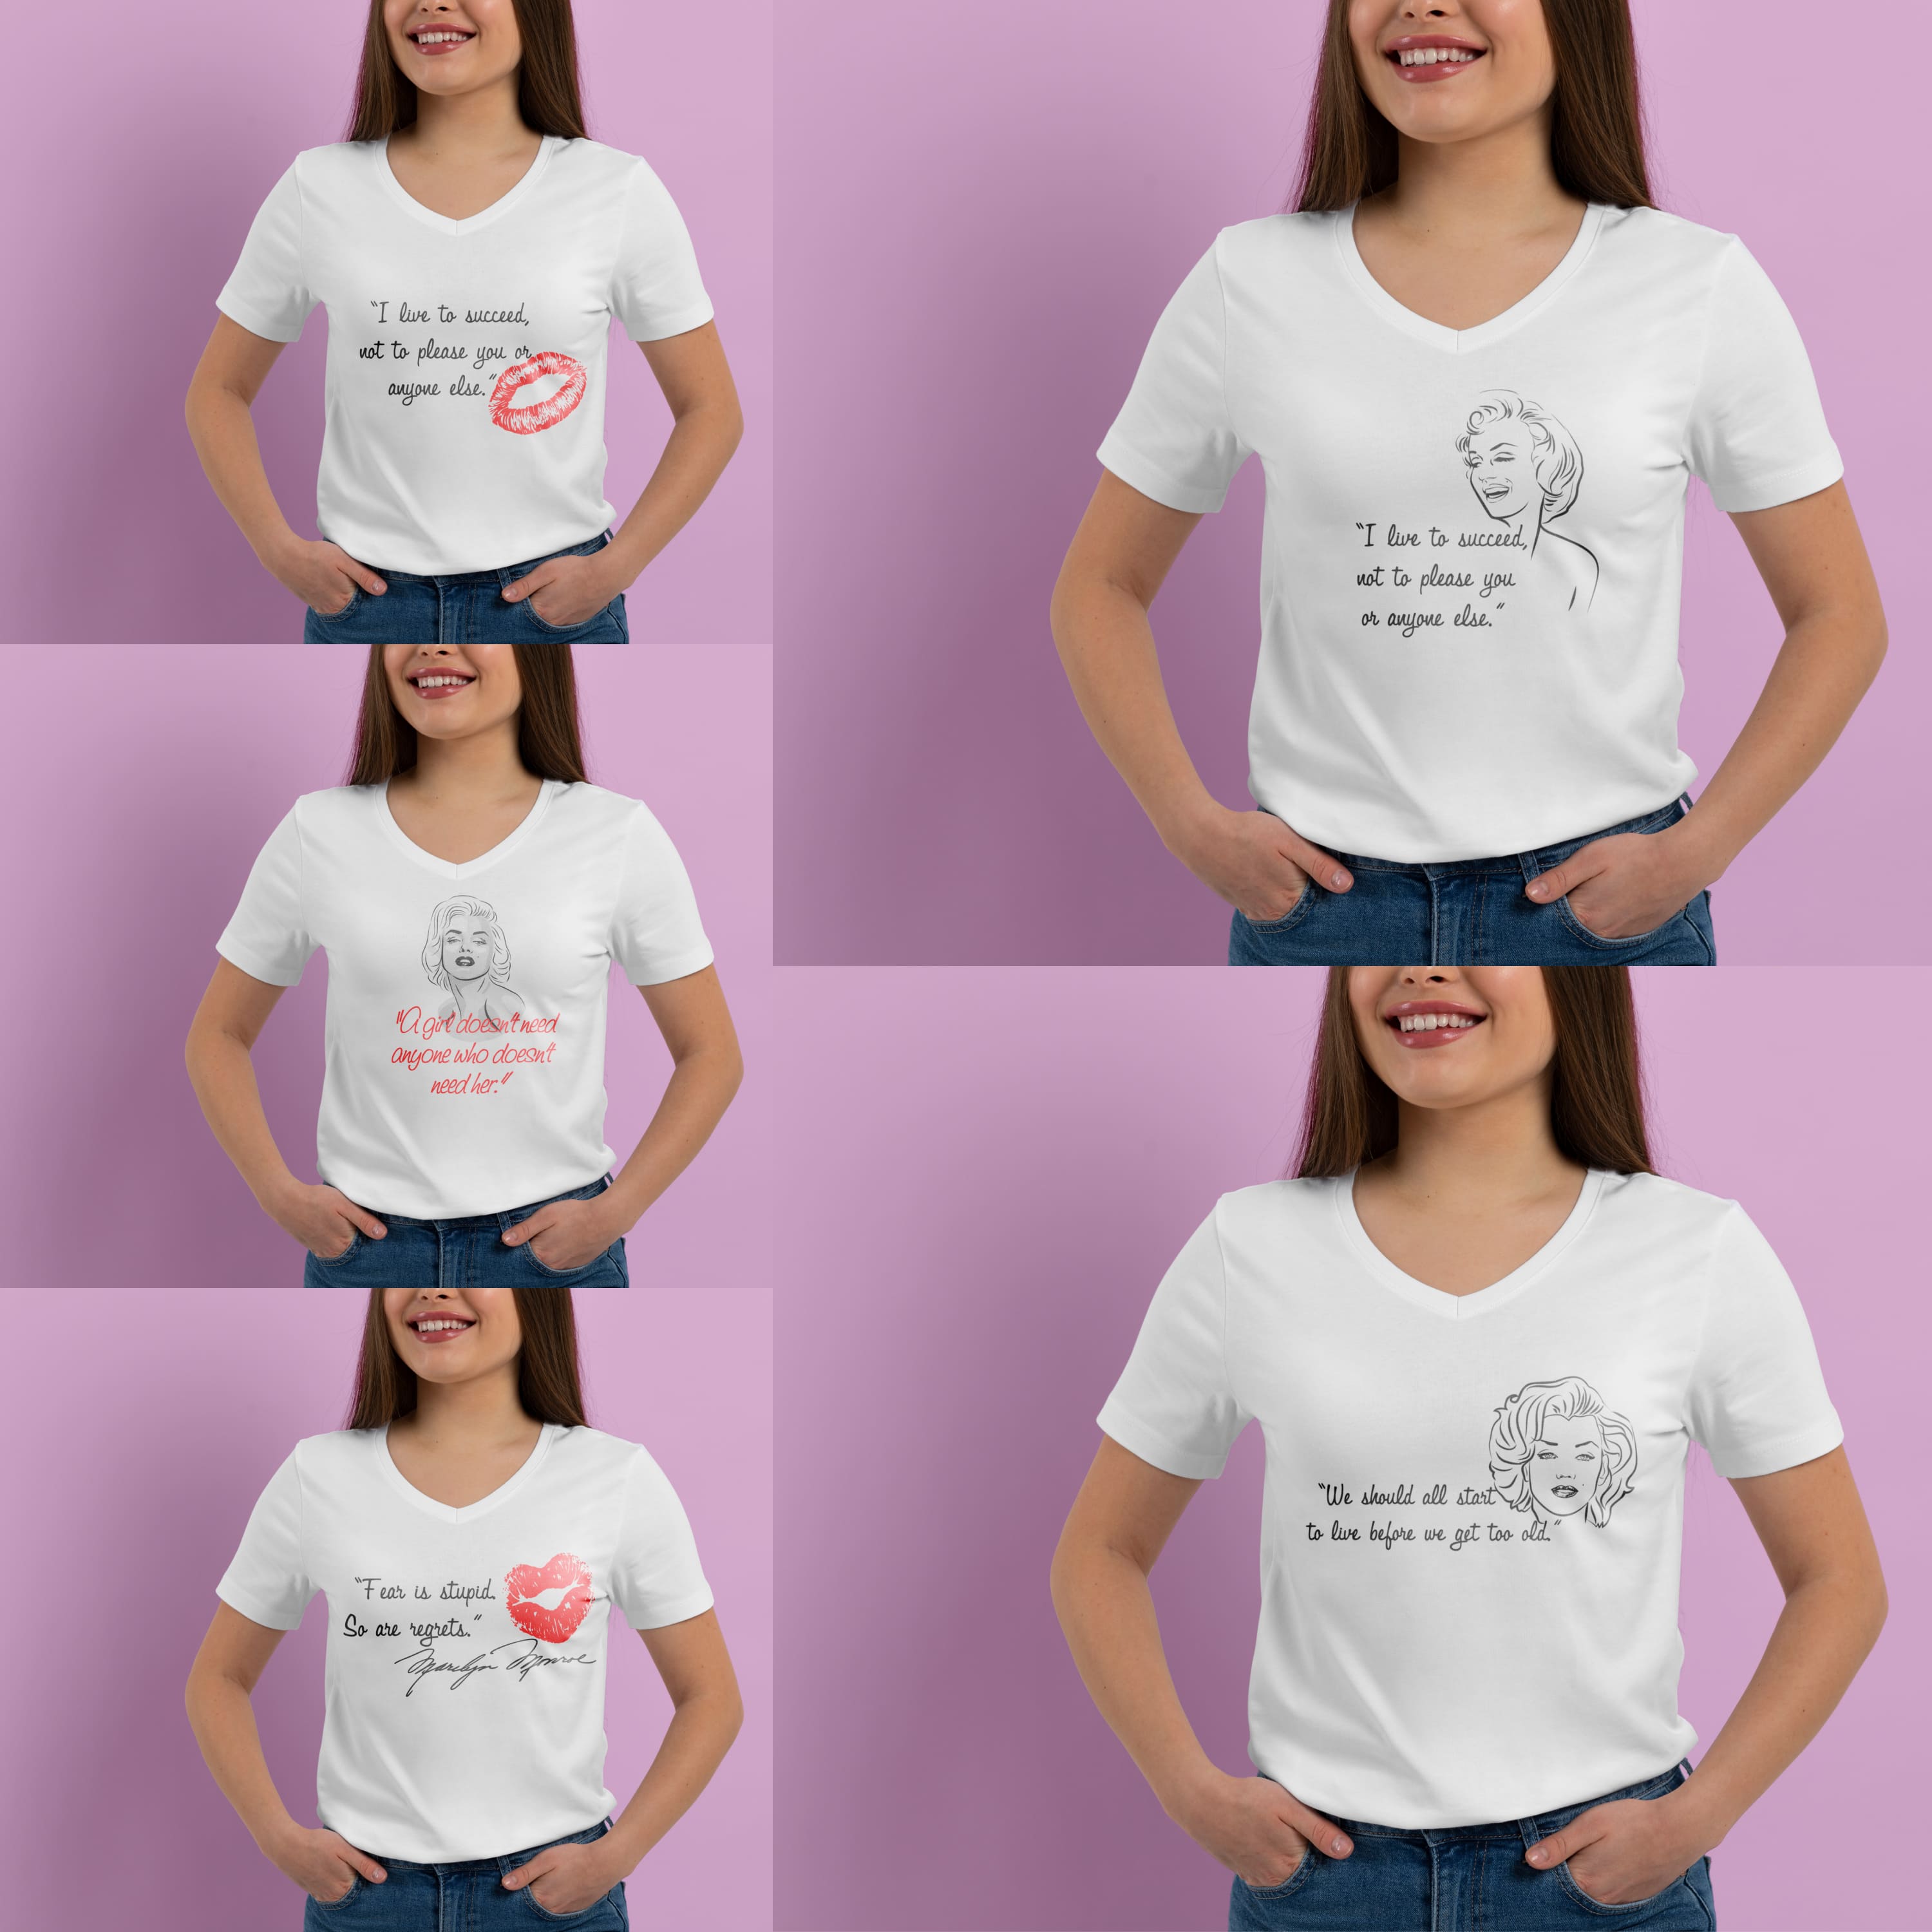 A collection of images of T-shirts with a gorgeous print of Marilyn Monroe quotes.